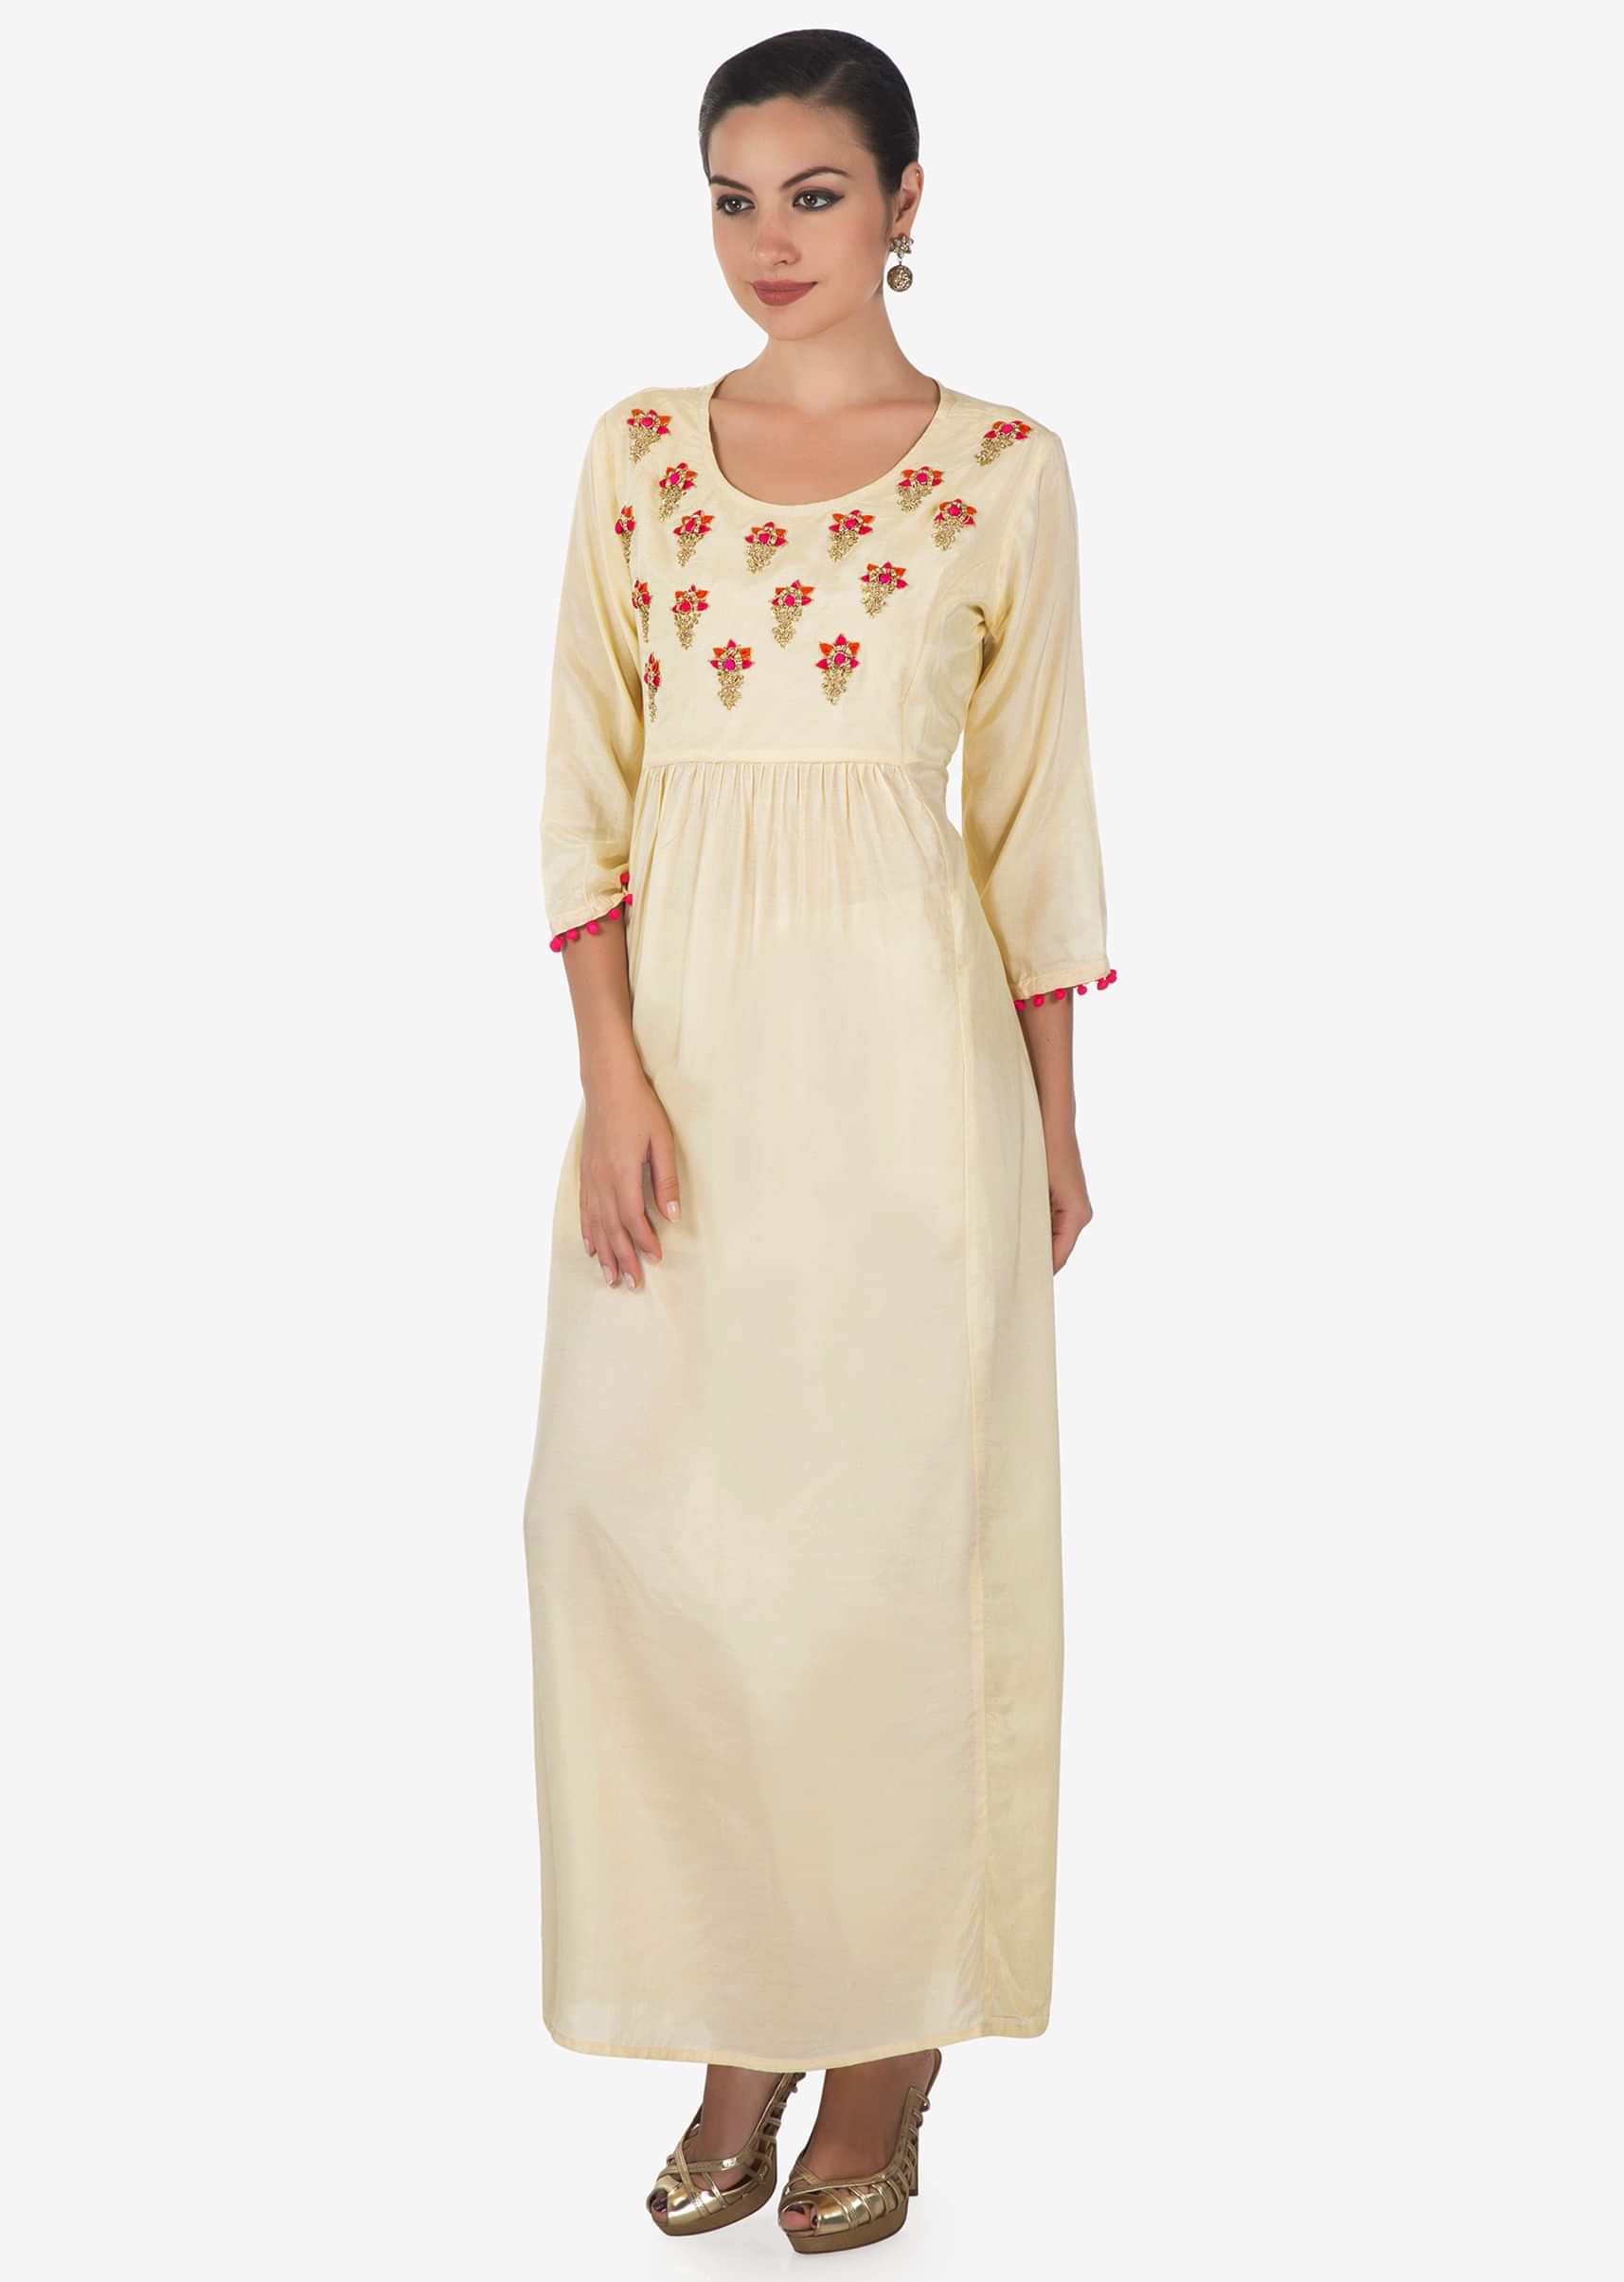 Cream dress adorn in embroidered butti and gathers only on Kalki